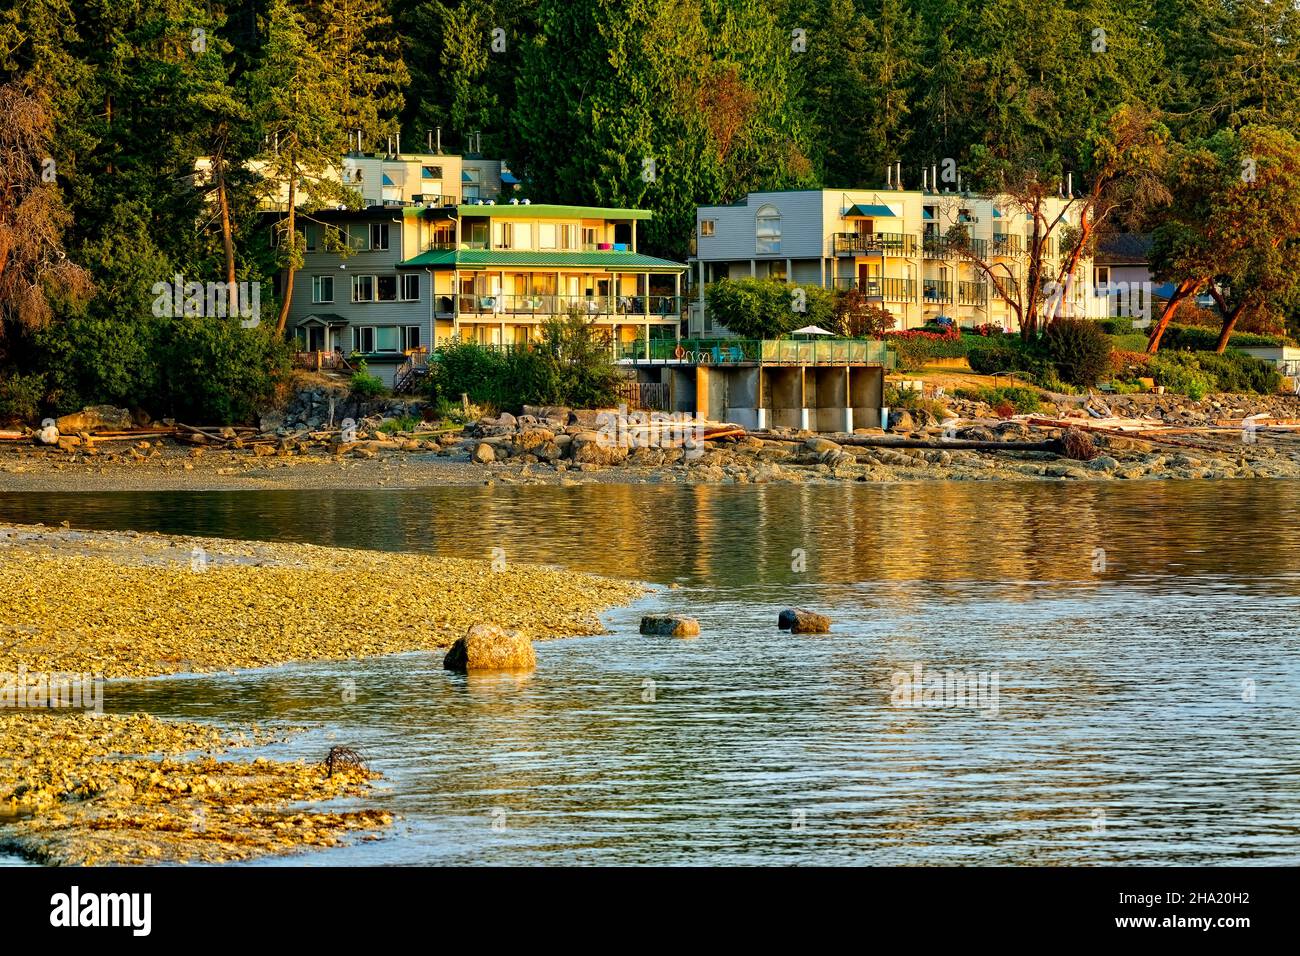 The Inn of the Sea vacation resort situated at the waters edge on the Stuart Channel between the Gulf Islands and beautiful Vancouver Island Stock Photo